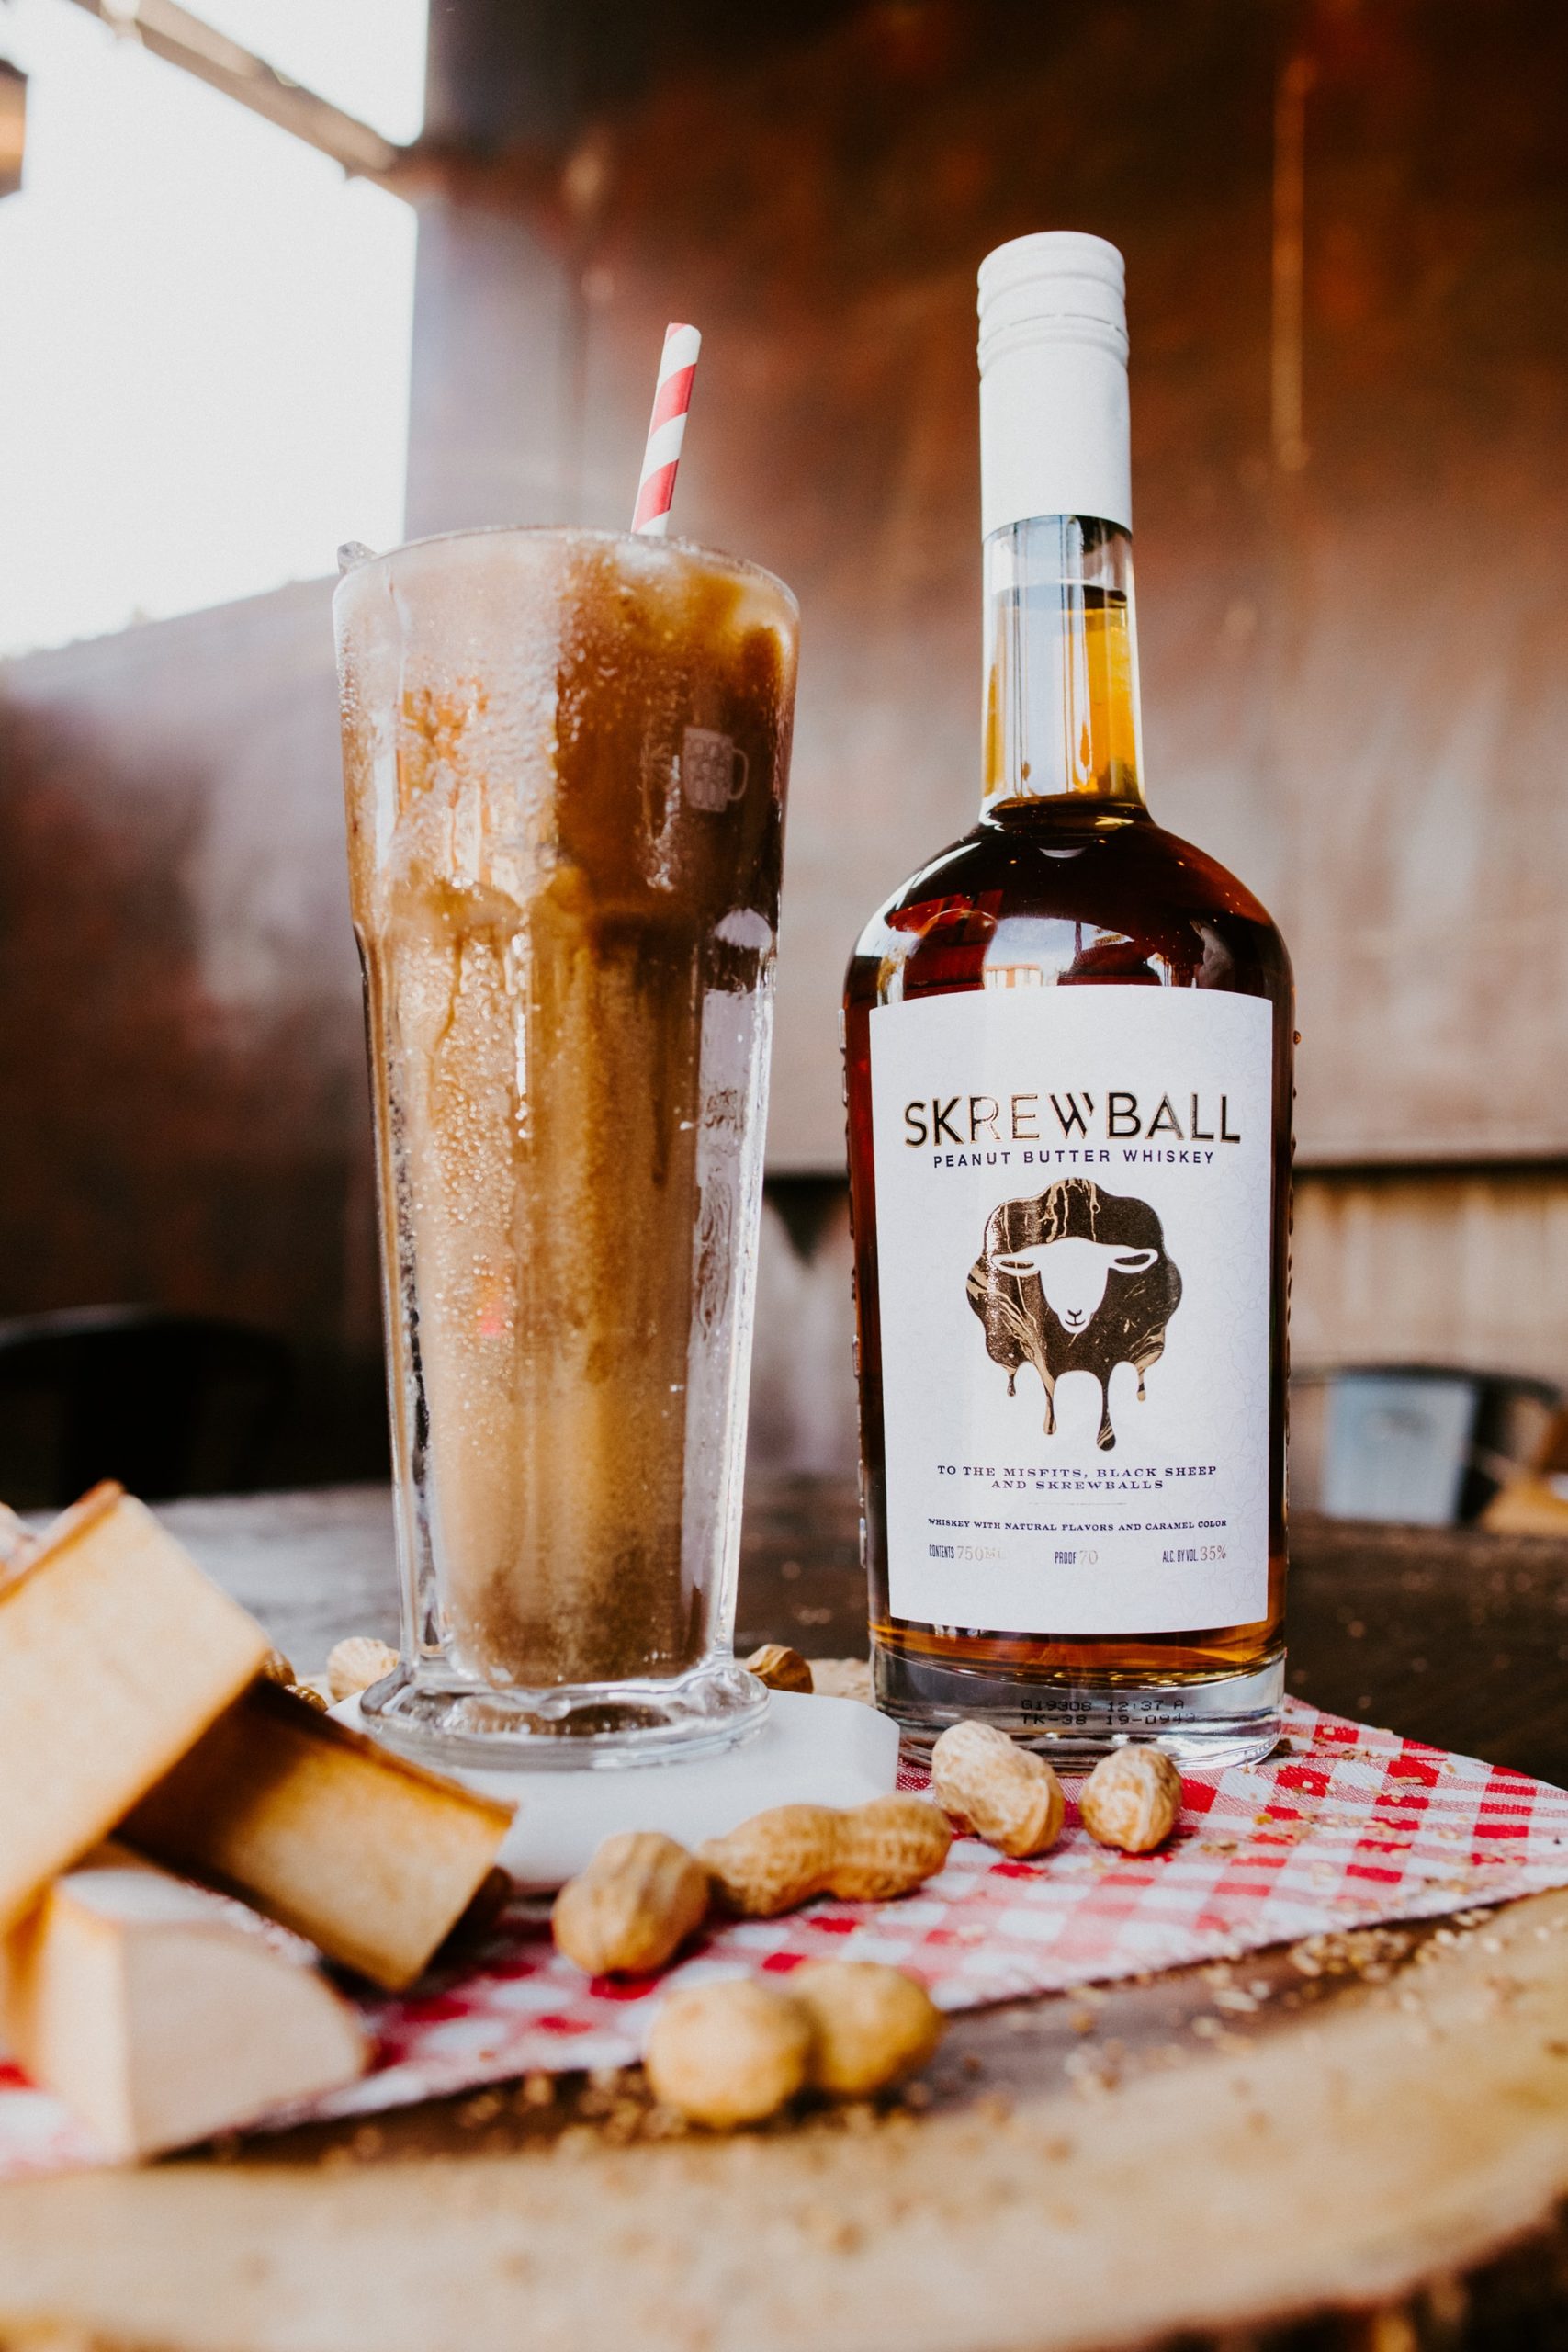 A bottle of Skrewball peanut butter whiskey next to an iced chocolate peanut butter cocktail in a tall glass.